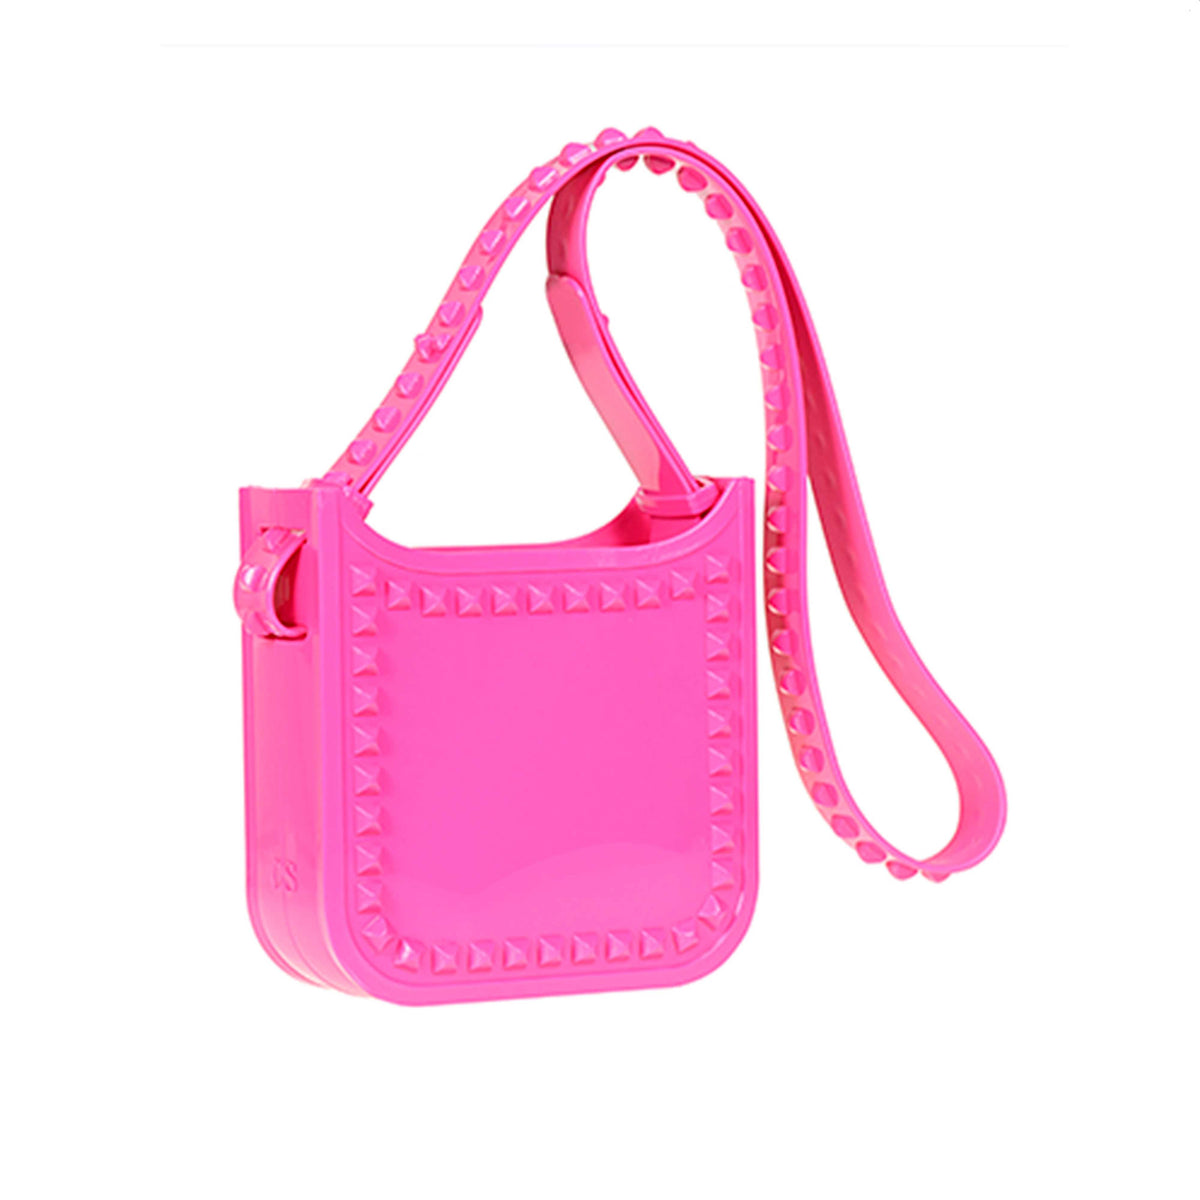 Made in Italy purse with studs in color fuchsia and perfect for date night